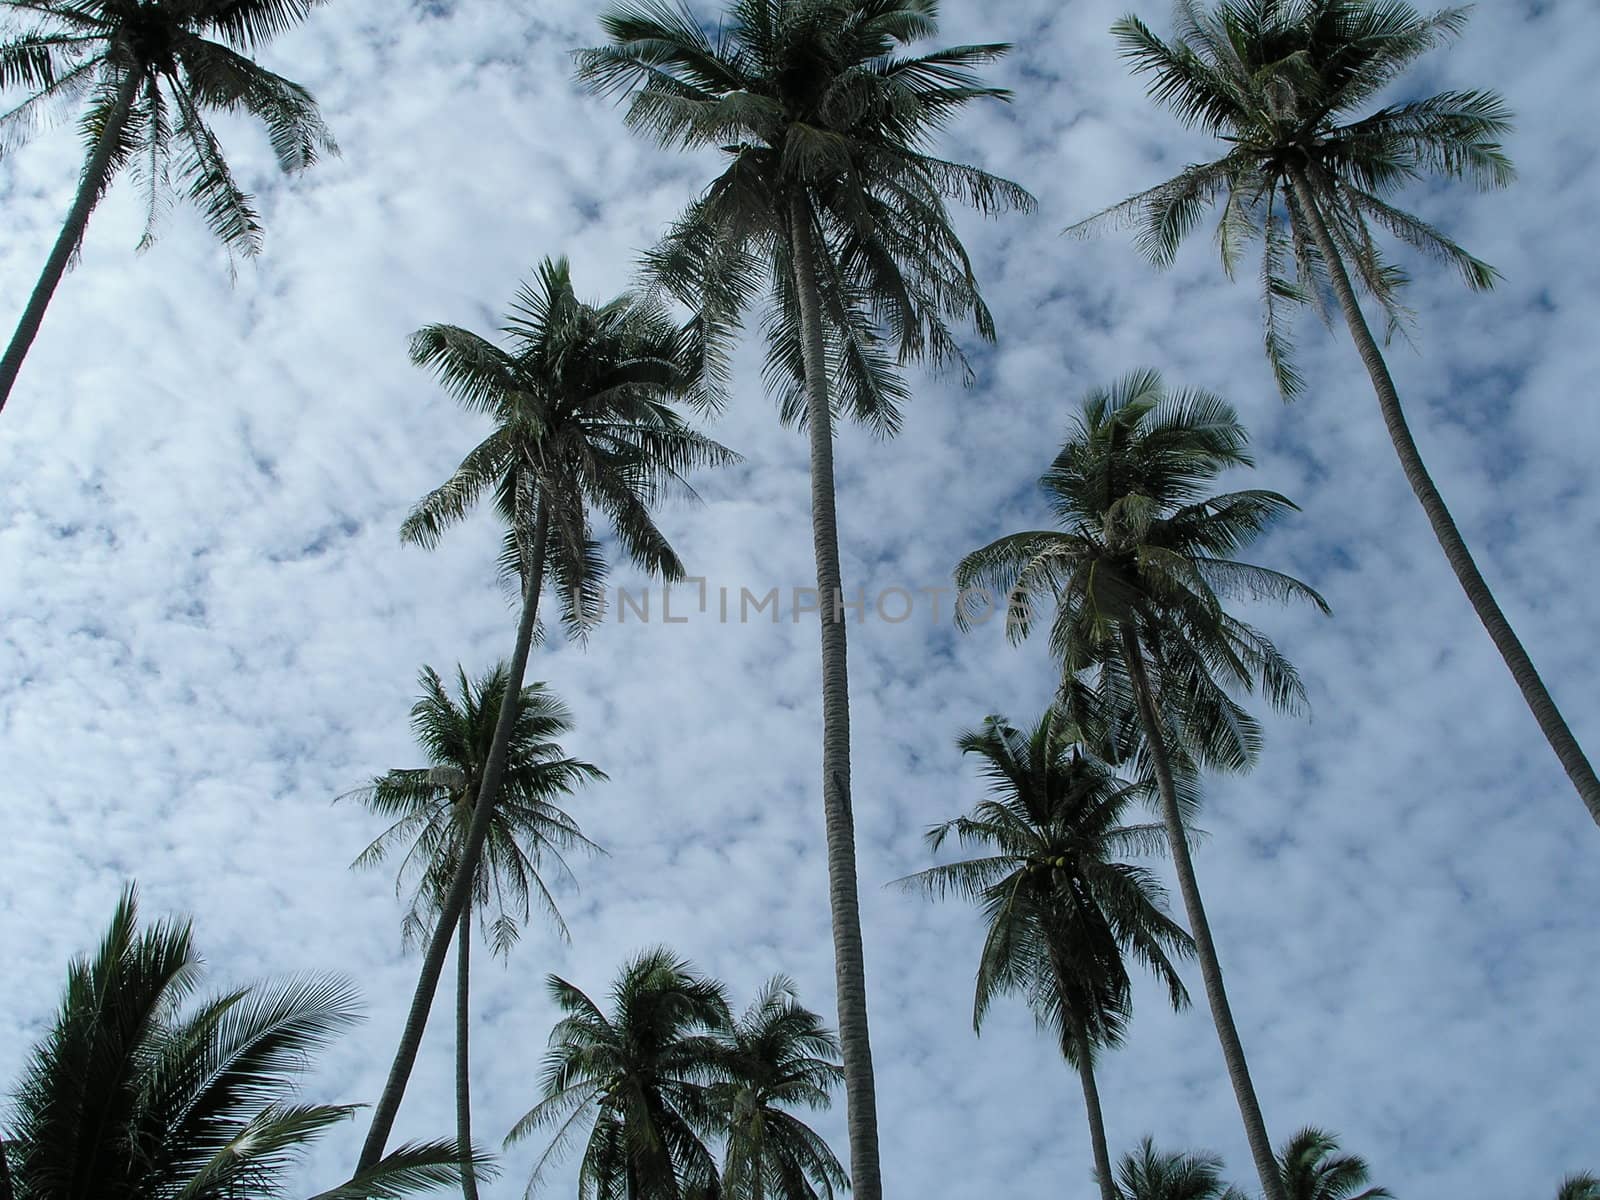 palms and clouds by mitek55